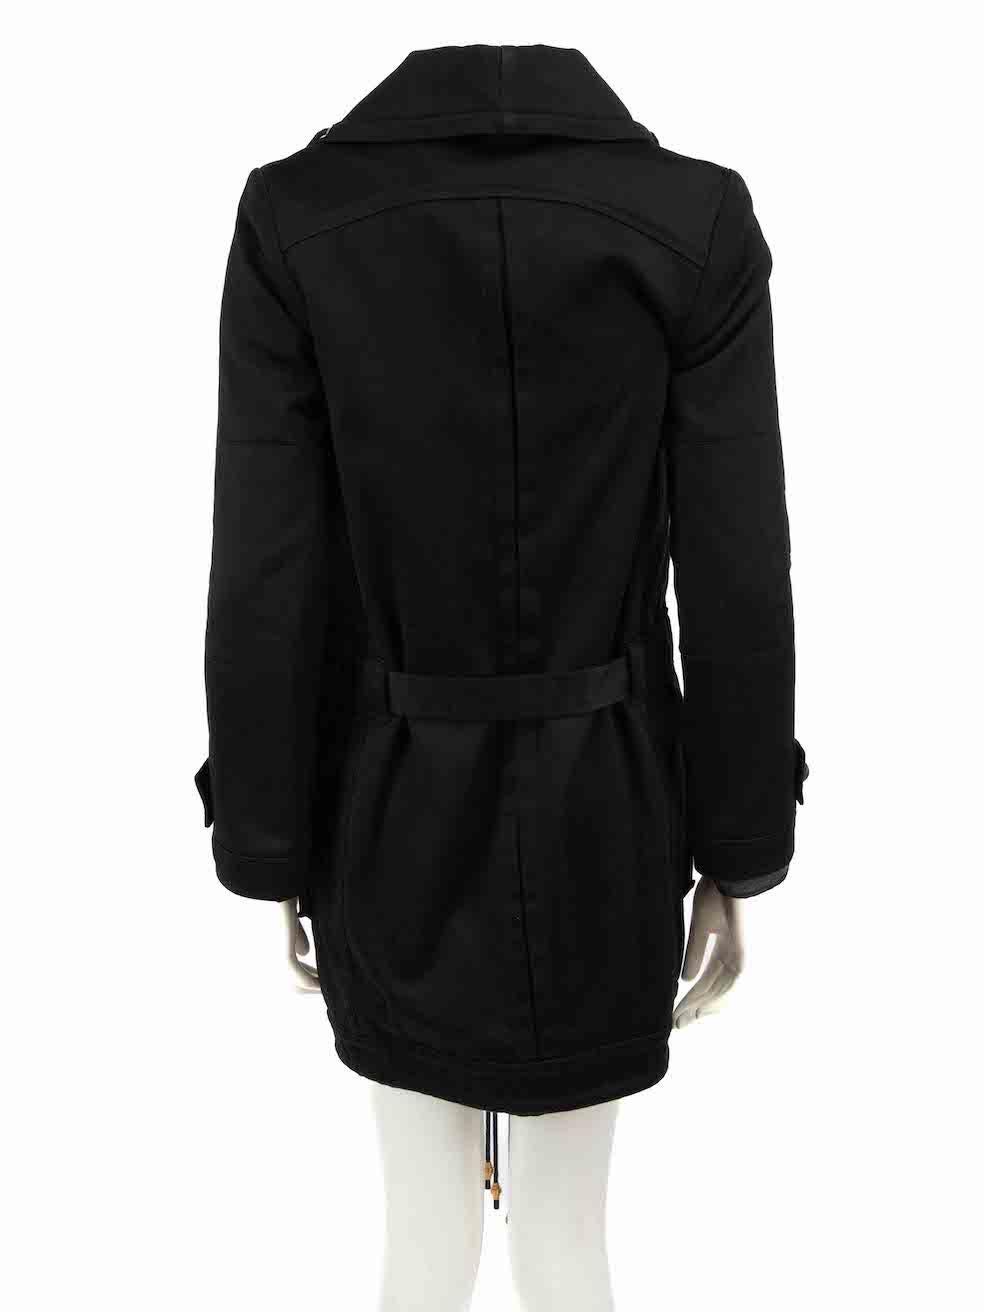 Balenciaga Black Trench Coat With Detachable Lining Size S In Good Condition For Sale In London, GB